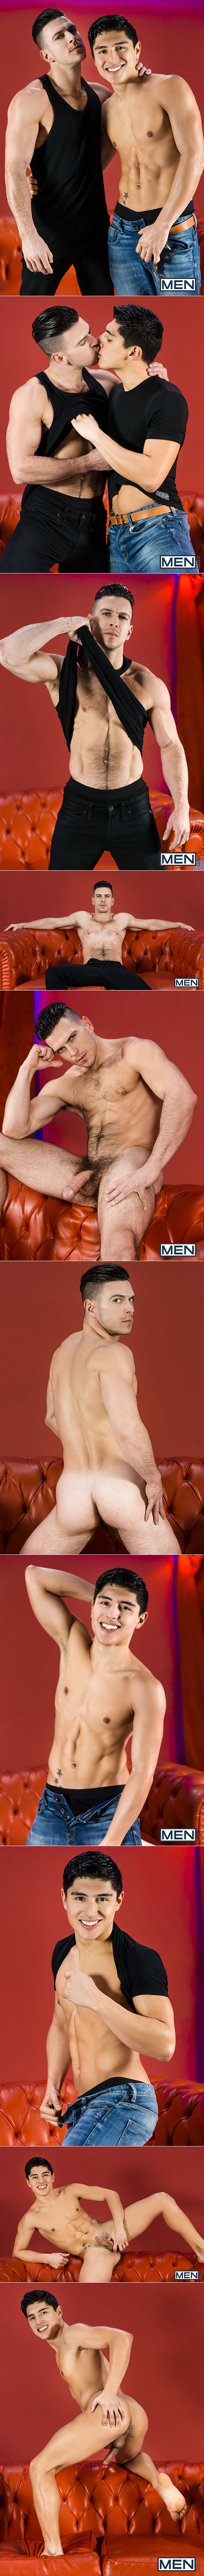 Men.com: Ken Summers gets fucked by Paddy O'Brian and his thick cock in "Satisfied"